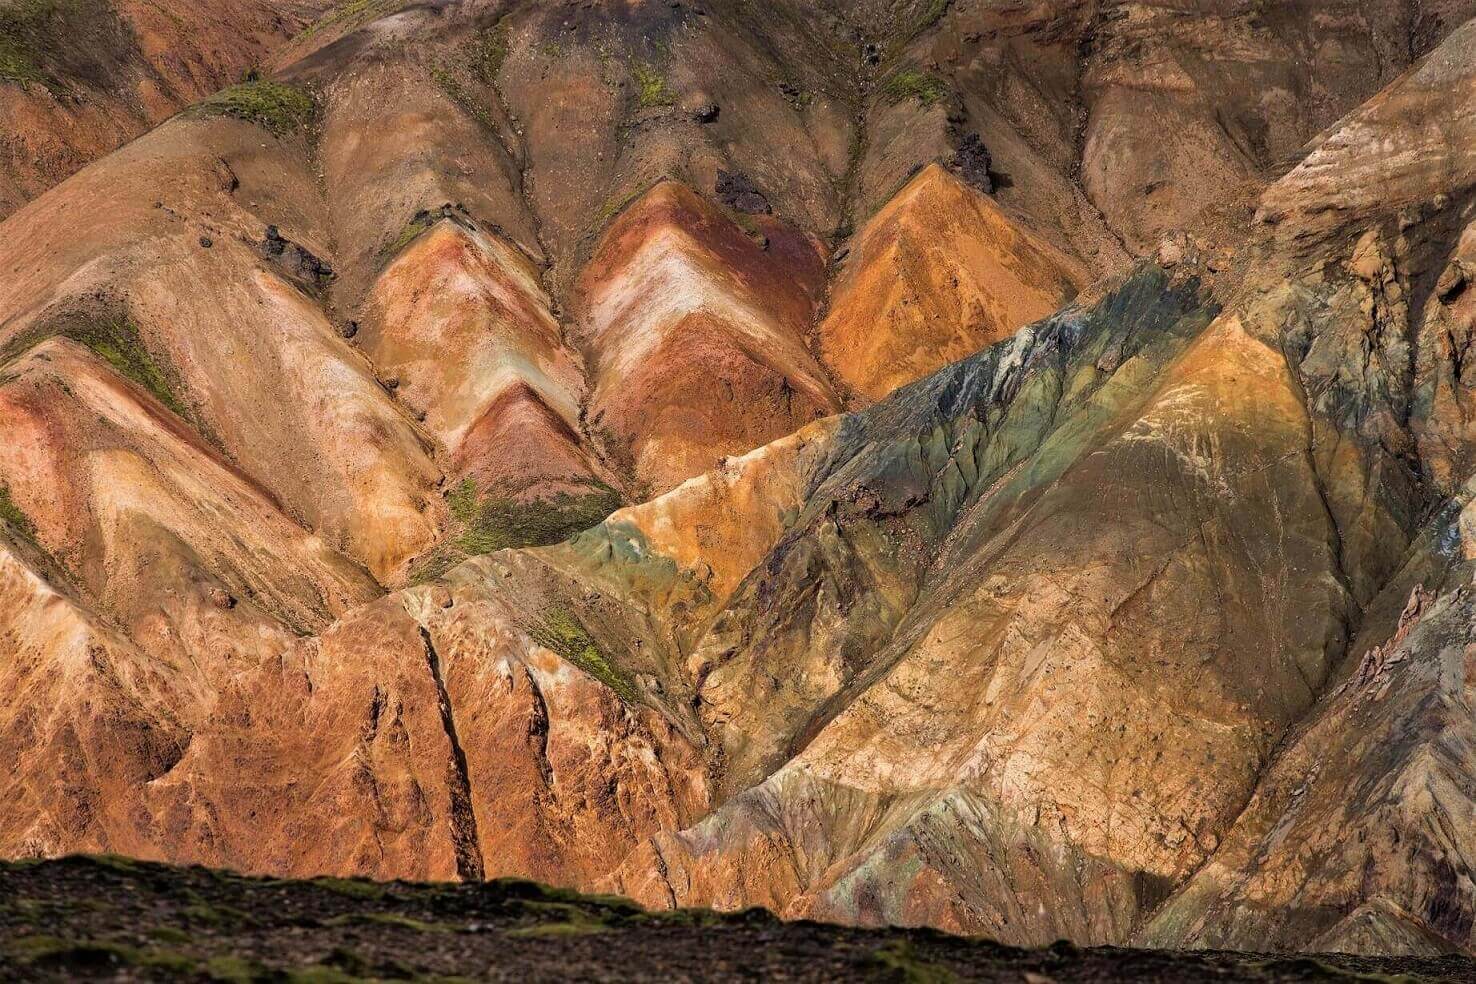 Come hike one of the best hikes in the world through Landmannalaugar Mountains